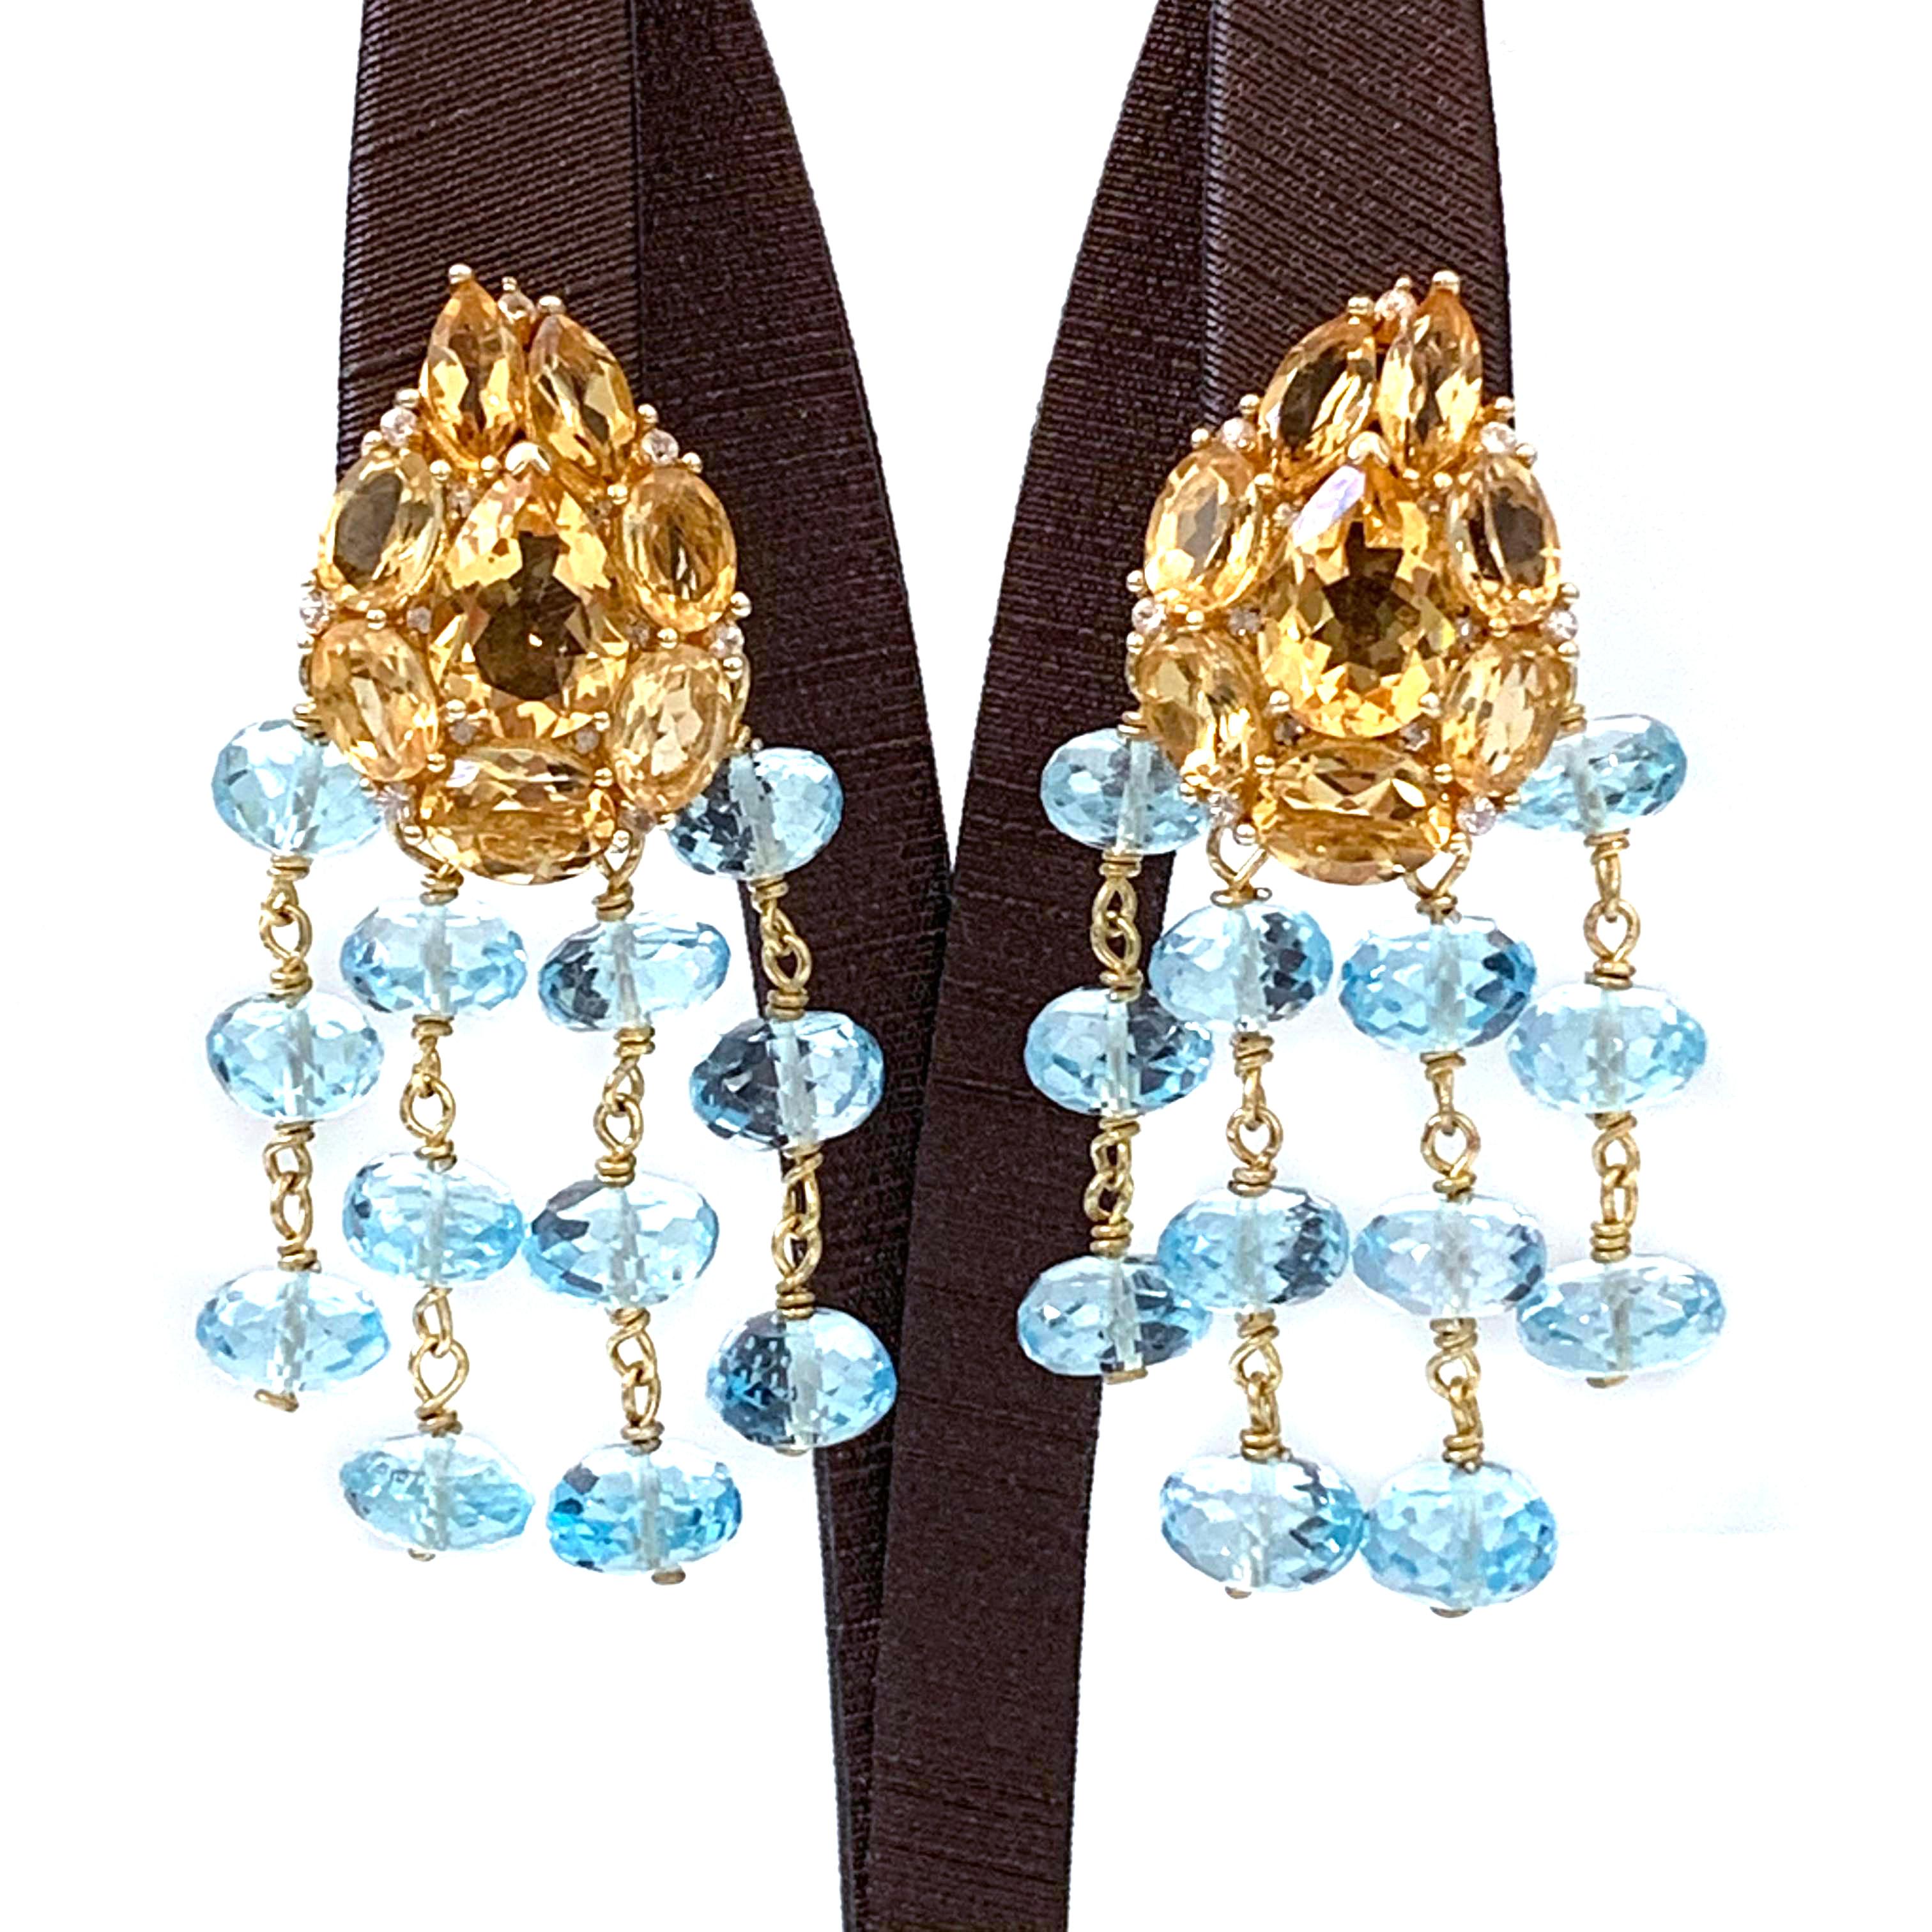 This stunning pair of Bijoux Num Citrine and Blue Topaz Dangle Earrings are so fabulous! The earrings feature cluster of genuine citrine, round white sapphire, and 4 strands of sky blue topaz roundels on each earring - handset and wire wrapped in